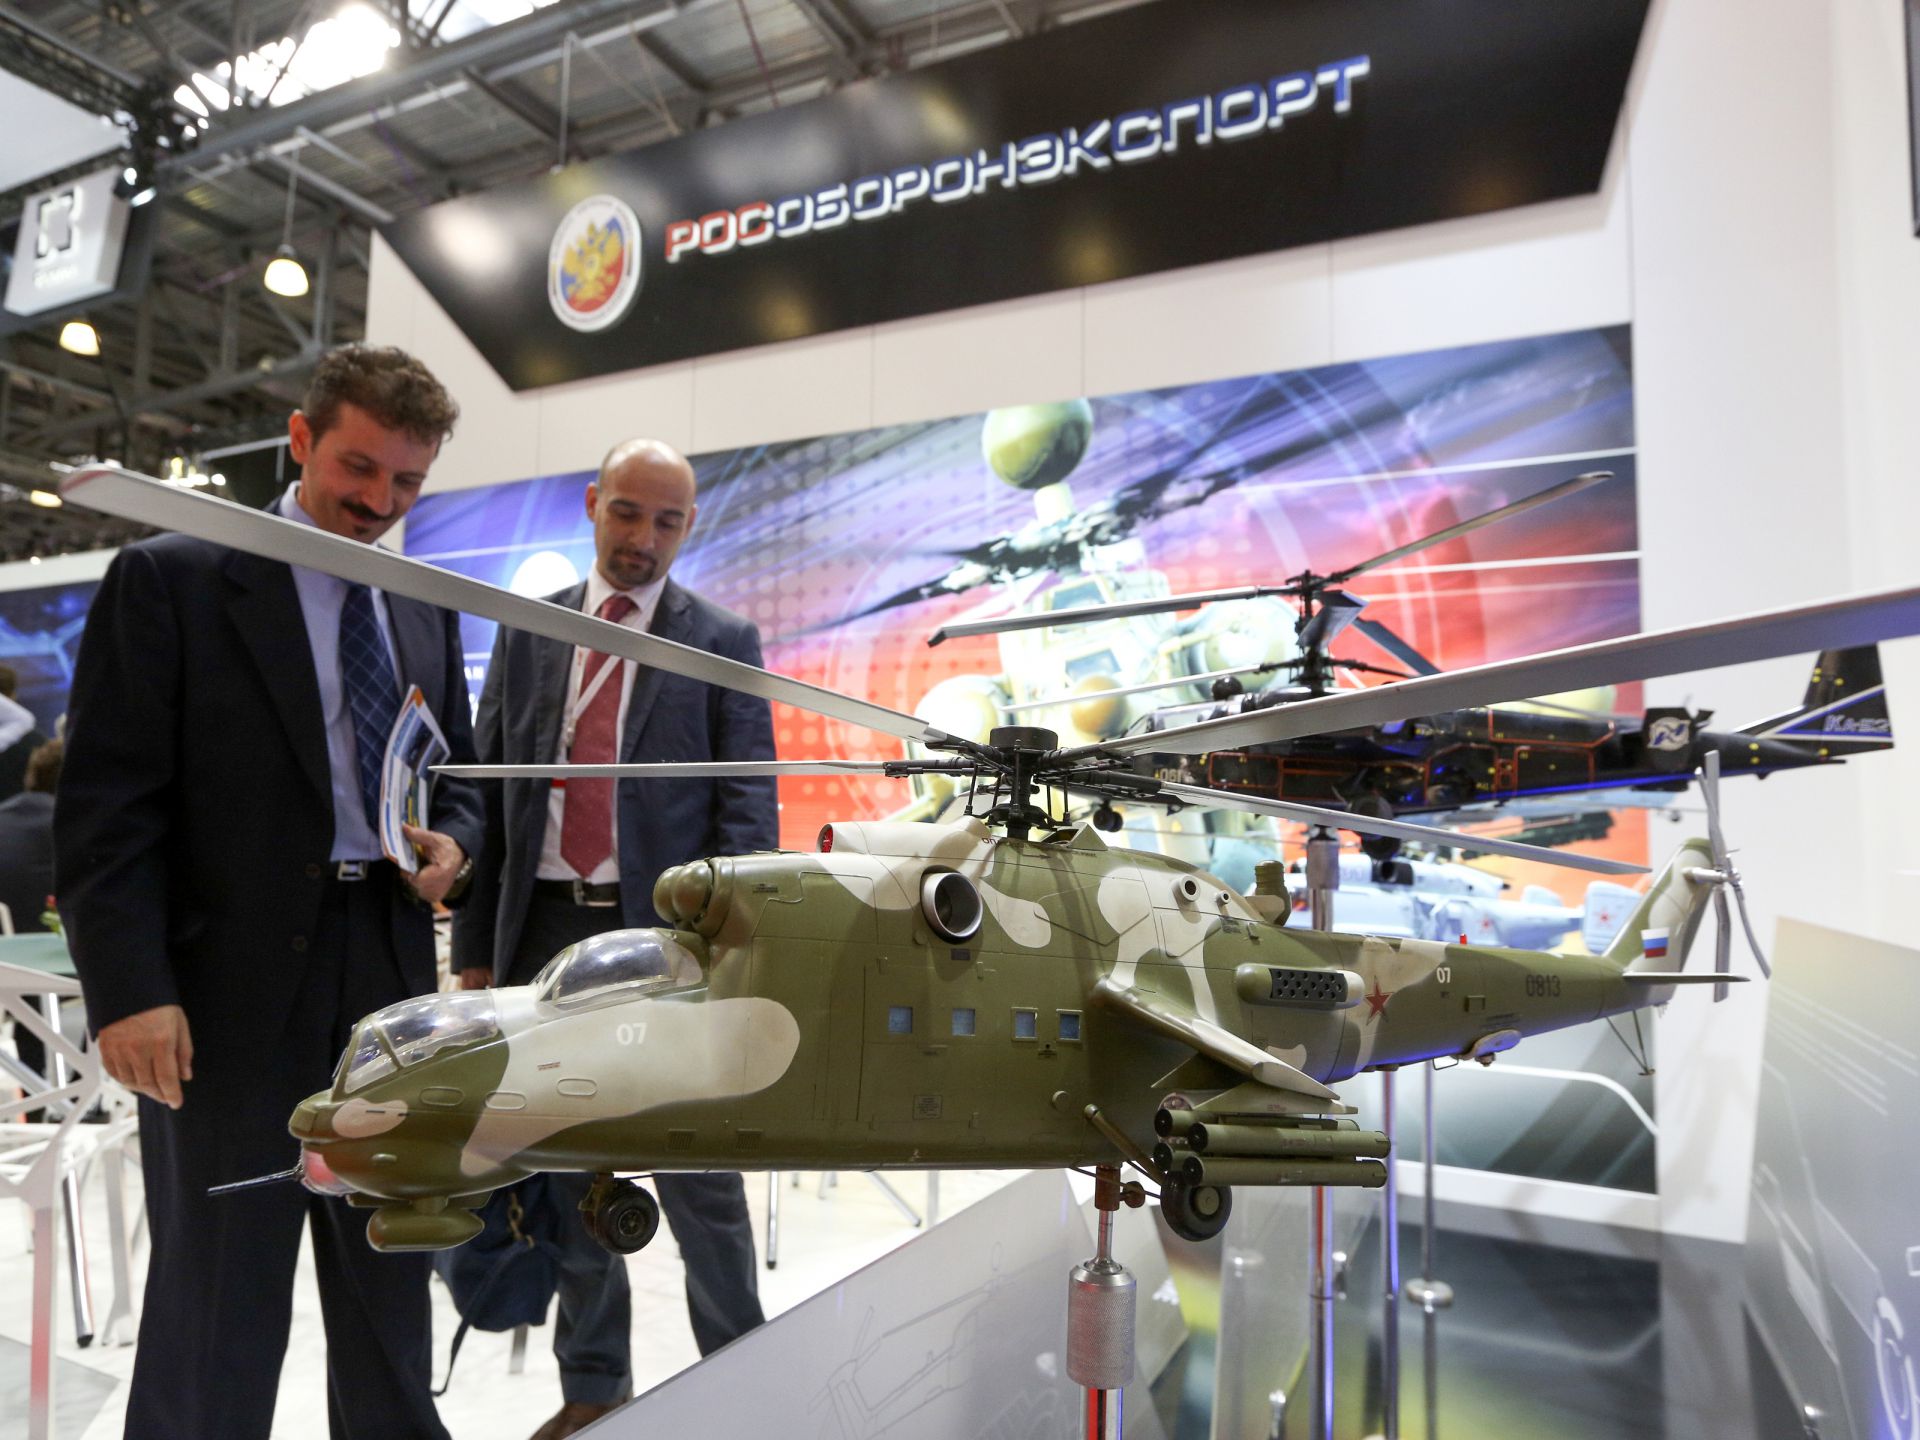 Rostec displays over 280 models of weapons and military equipment at AAD 2018 exhibition in South Africa